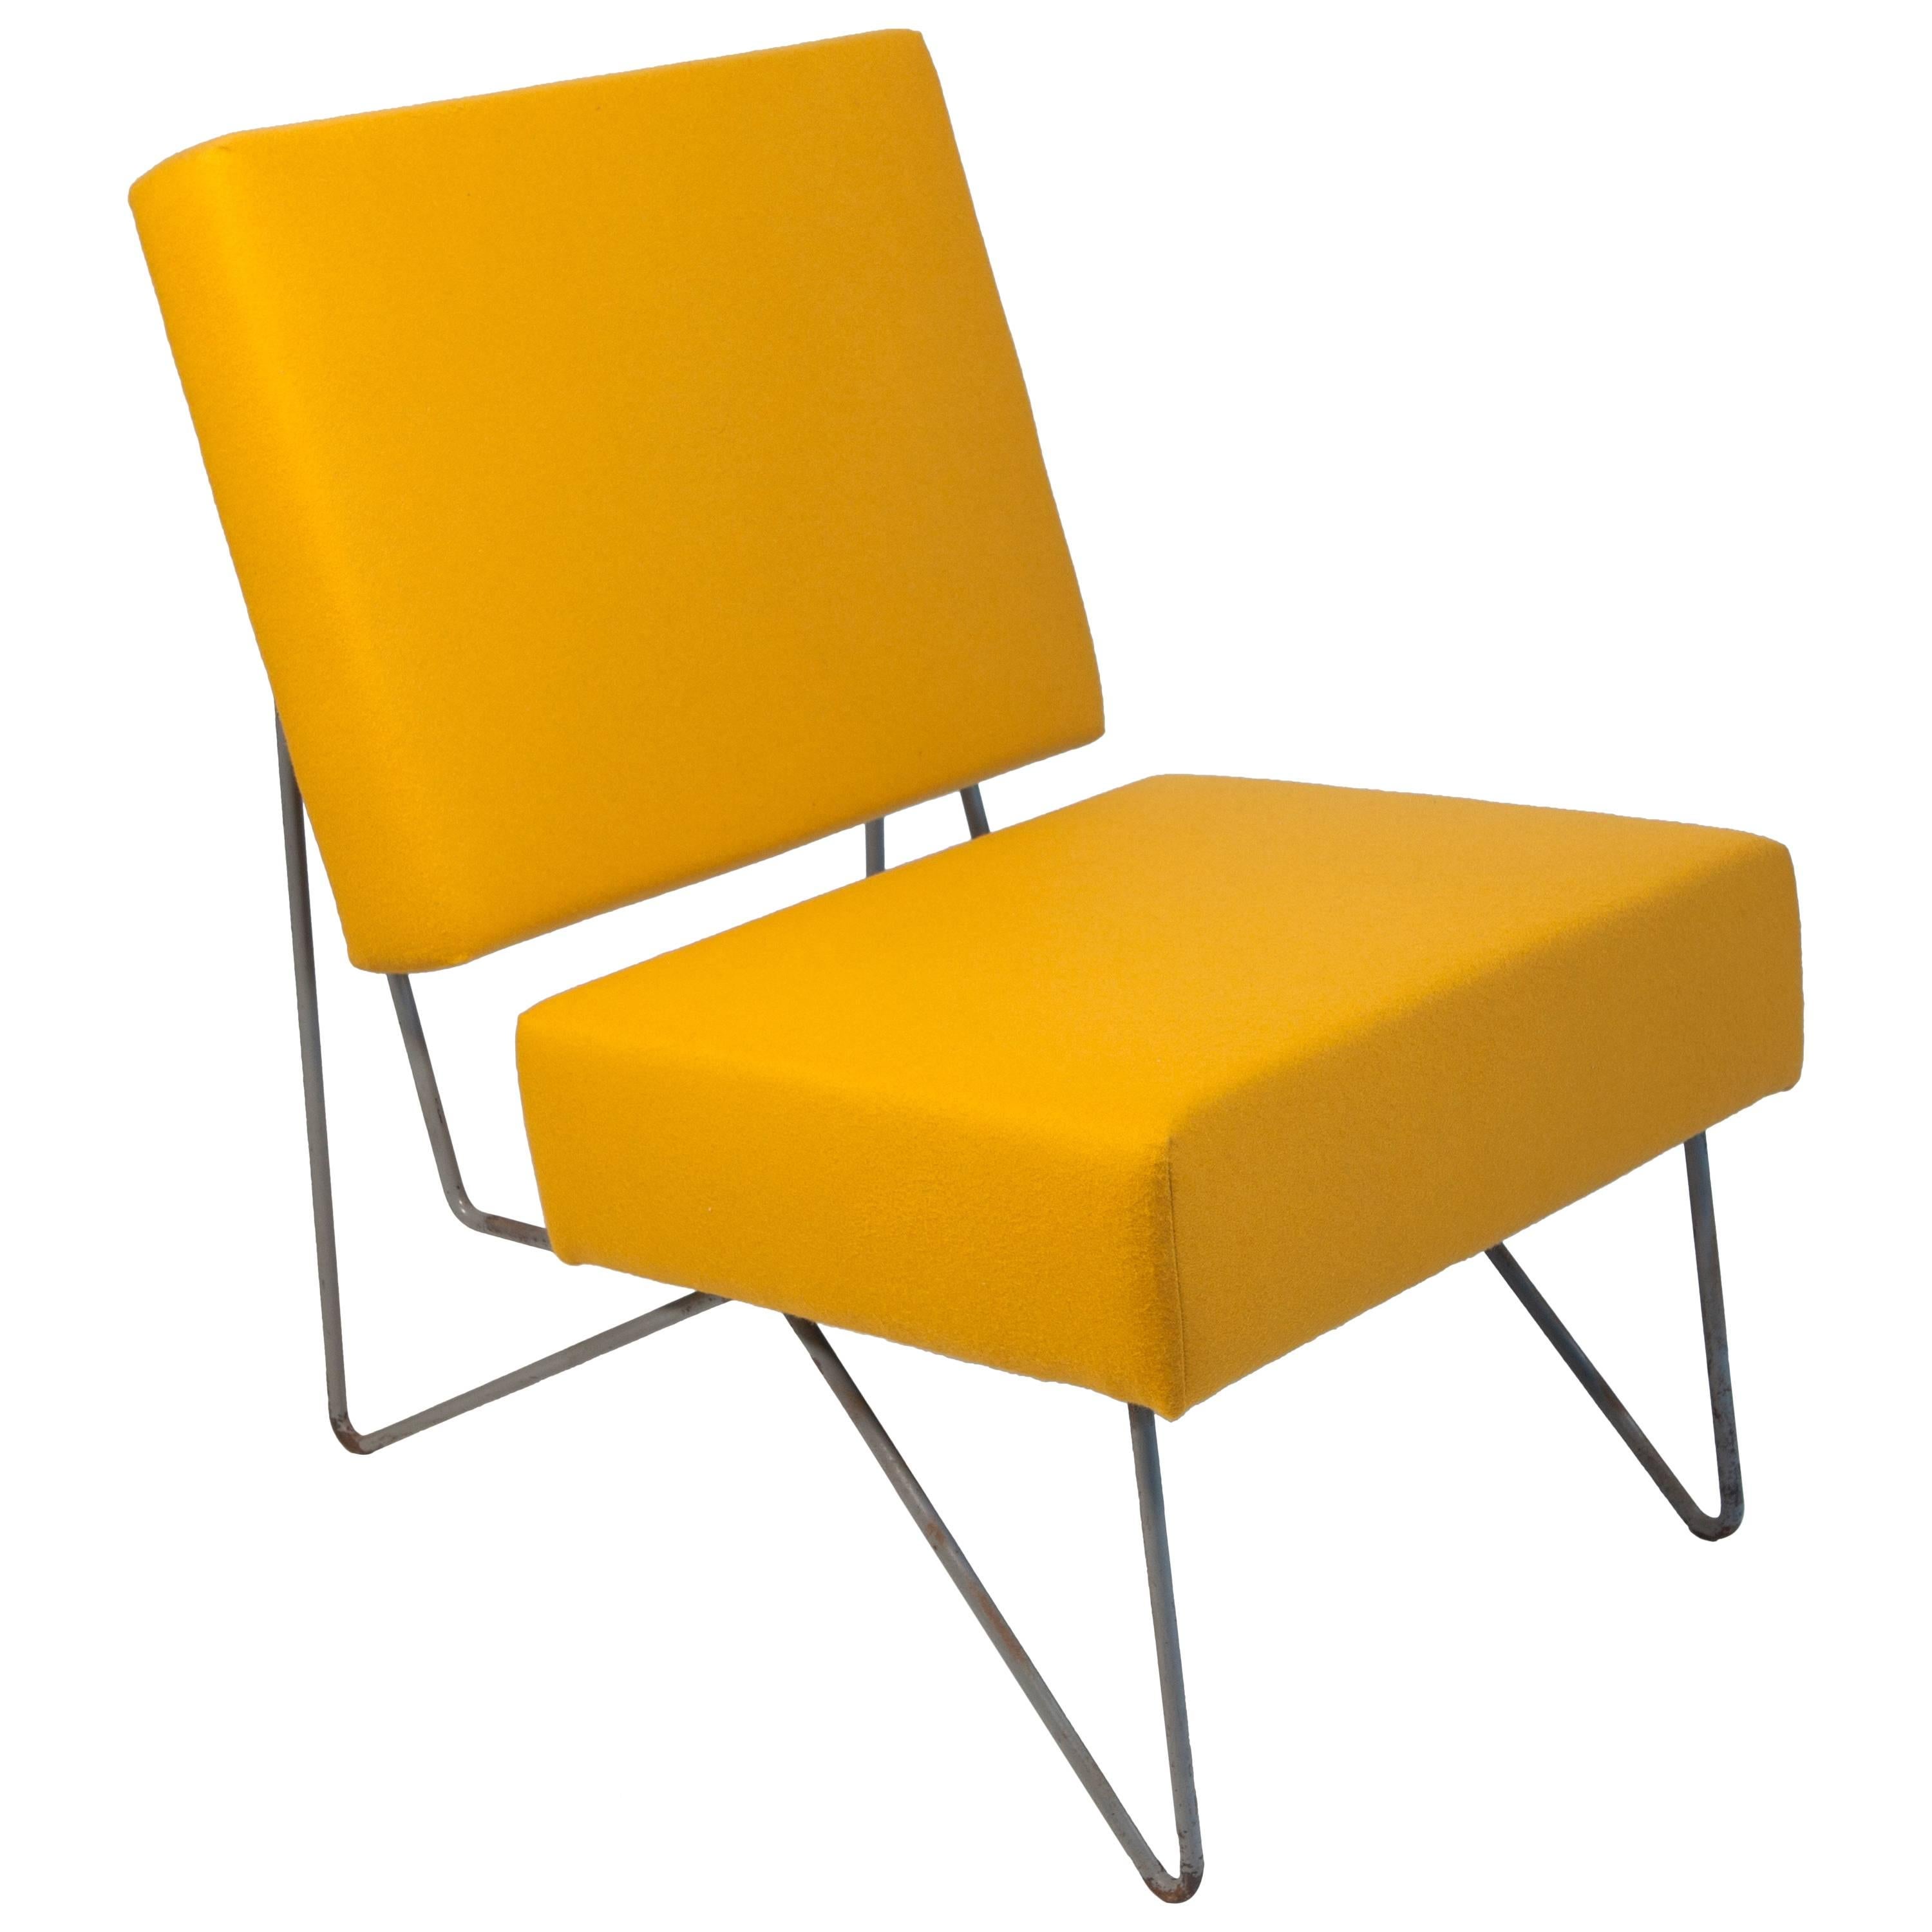 Combex FM03 Chair Designed by Cees Braakman for Pastoe, 1954